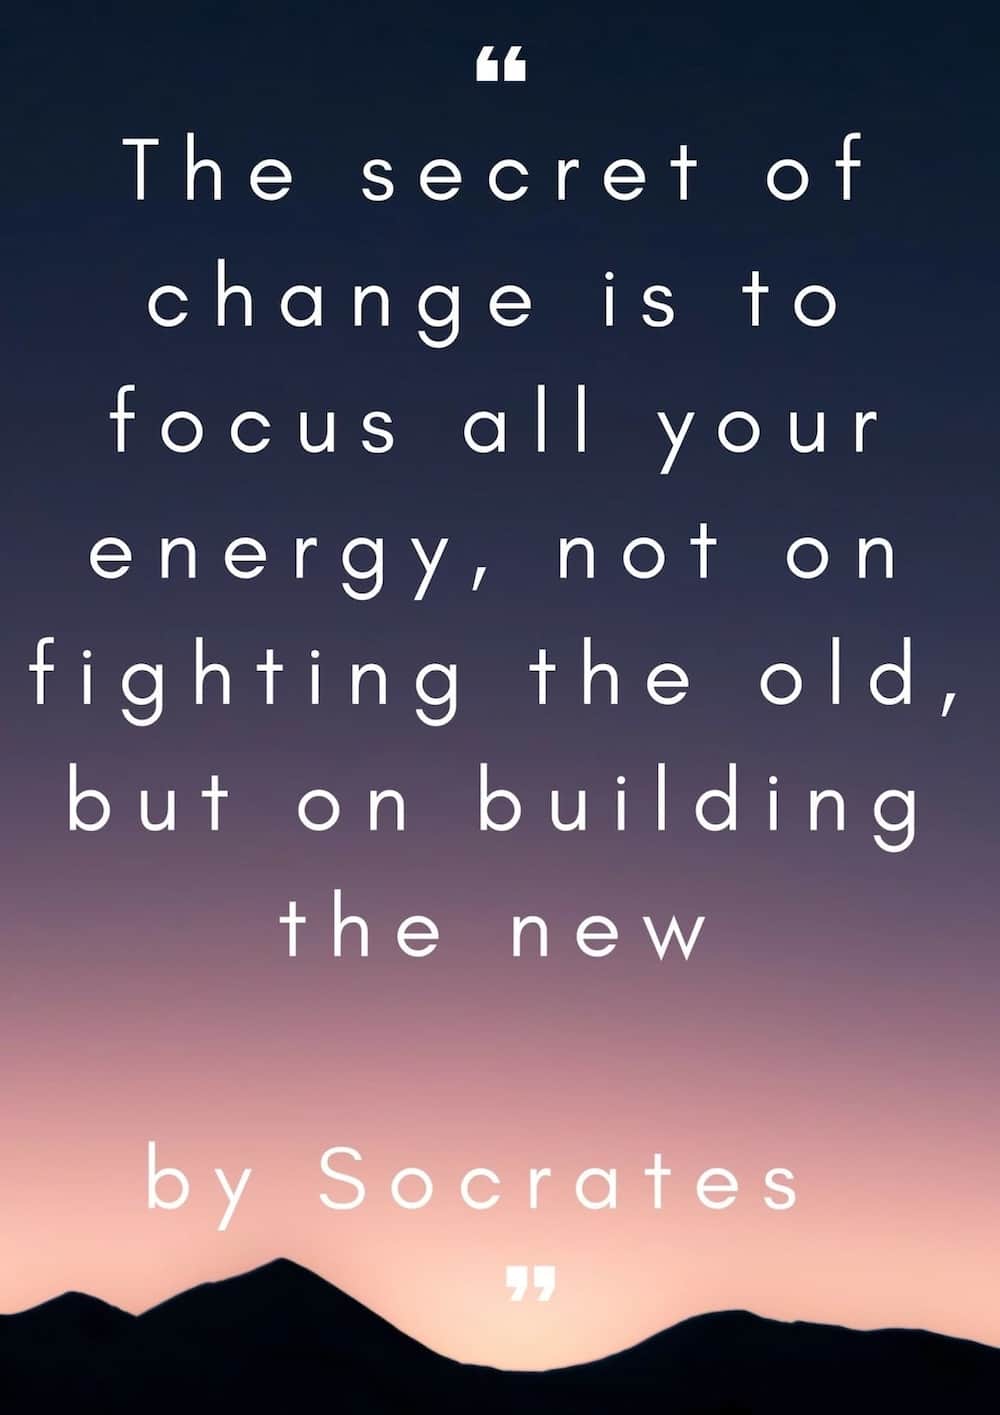 Business quotes about change
Famous quotes about change
Funny quotes about change
Quotes about change 
Best quotes about change